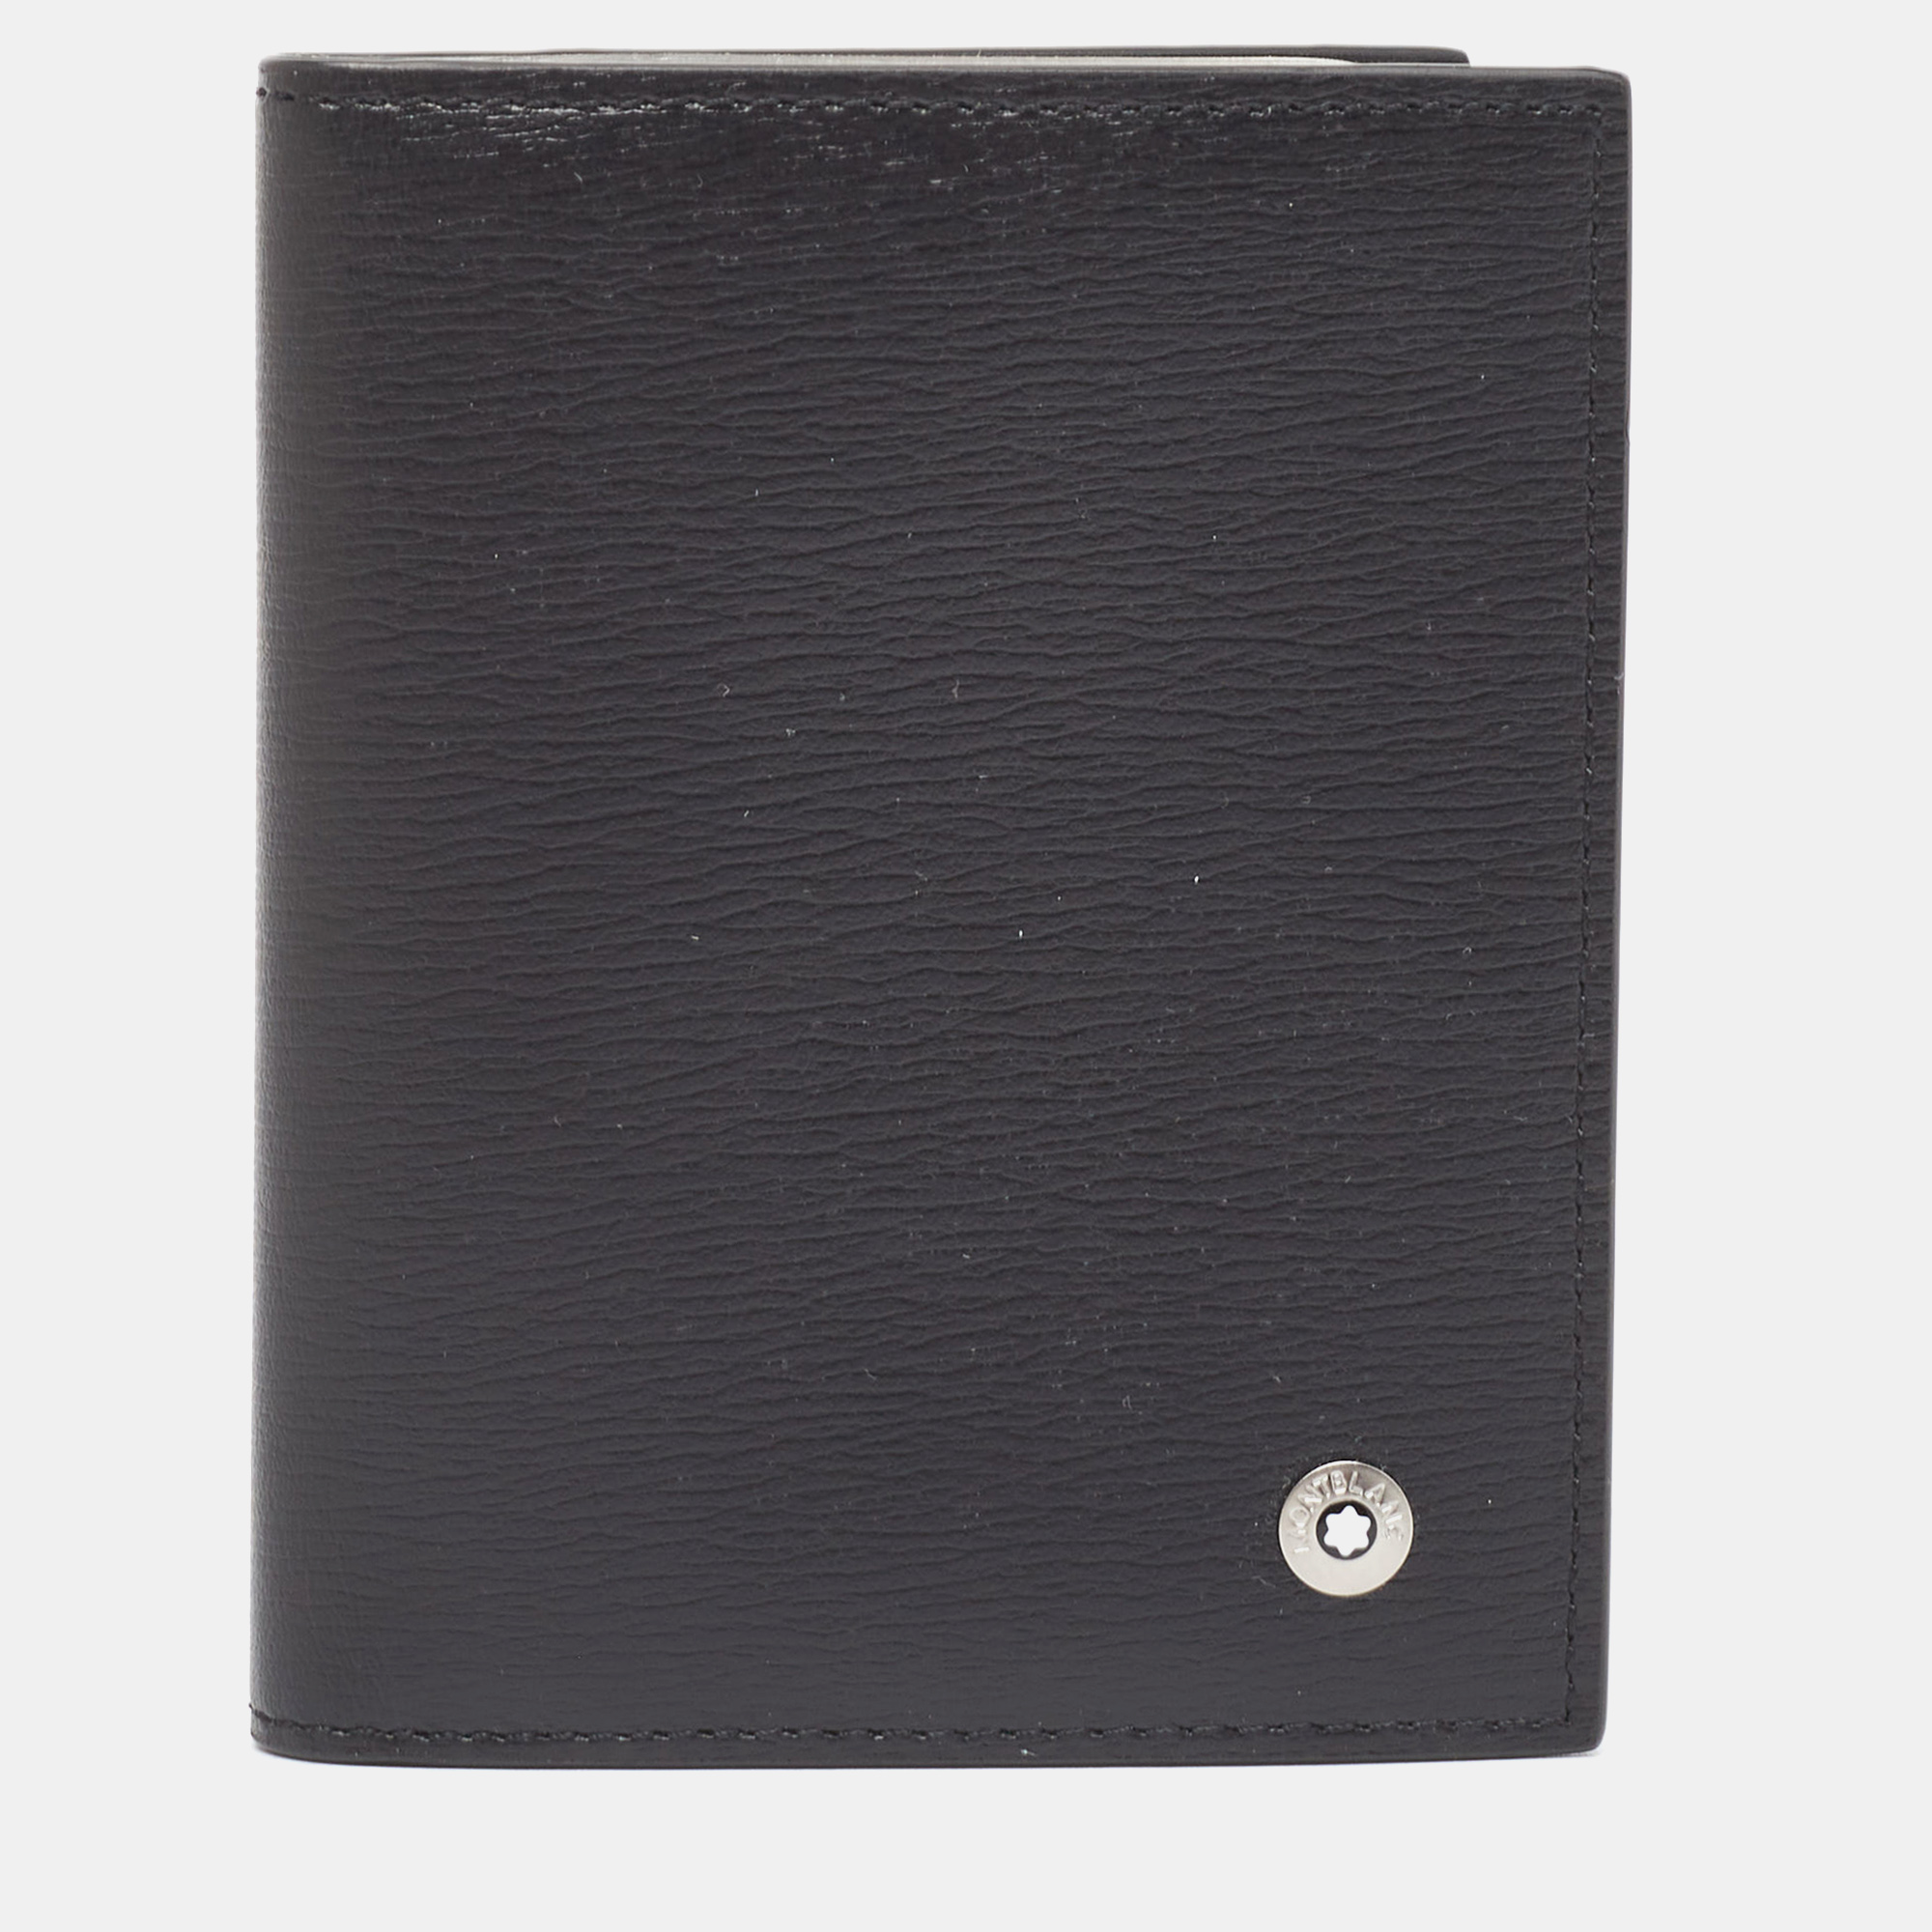 Pre-owned Montblanc Black Leather Sartorial Business Card Holder